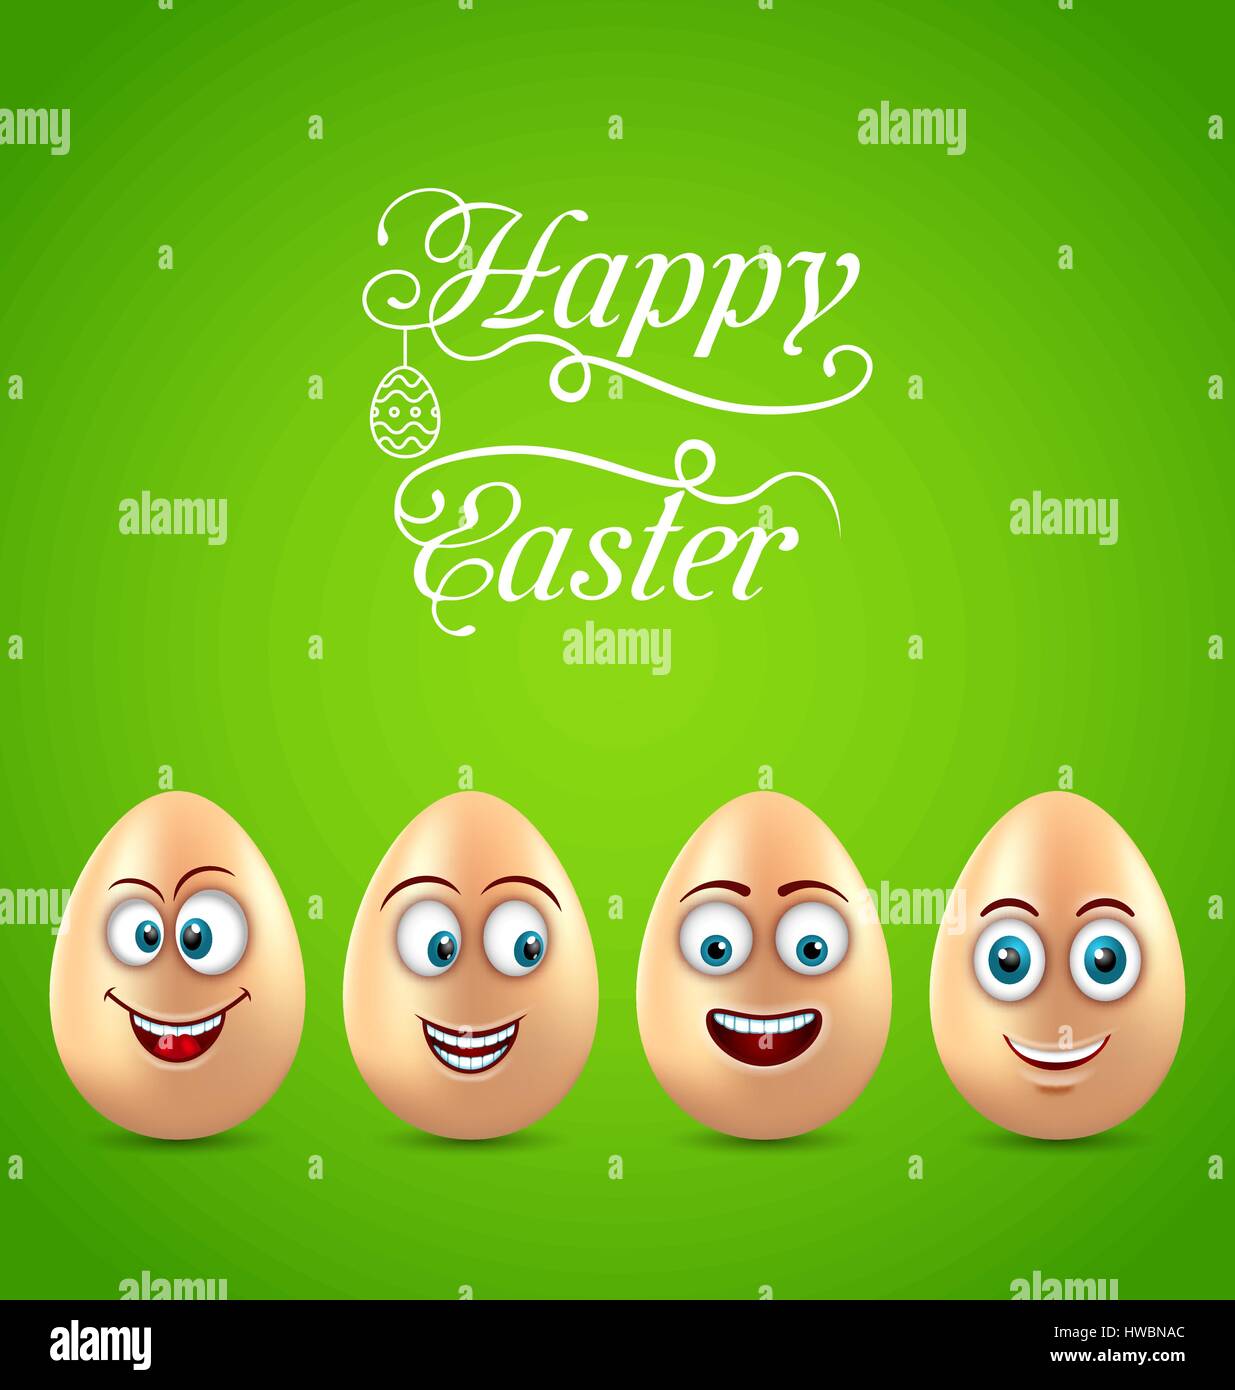 Humor Easter Card with Funny Eggs Stock Vector